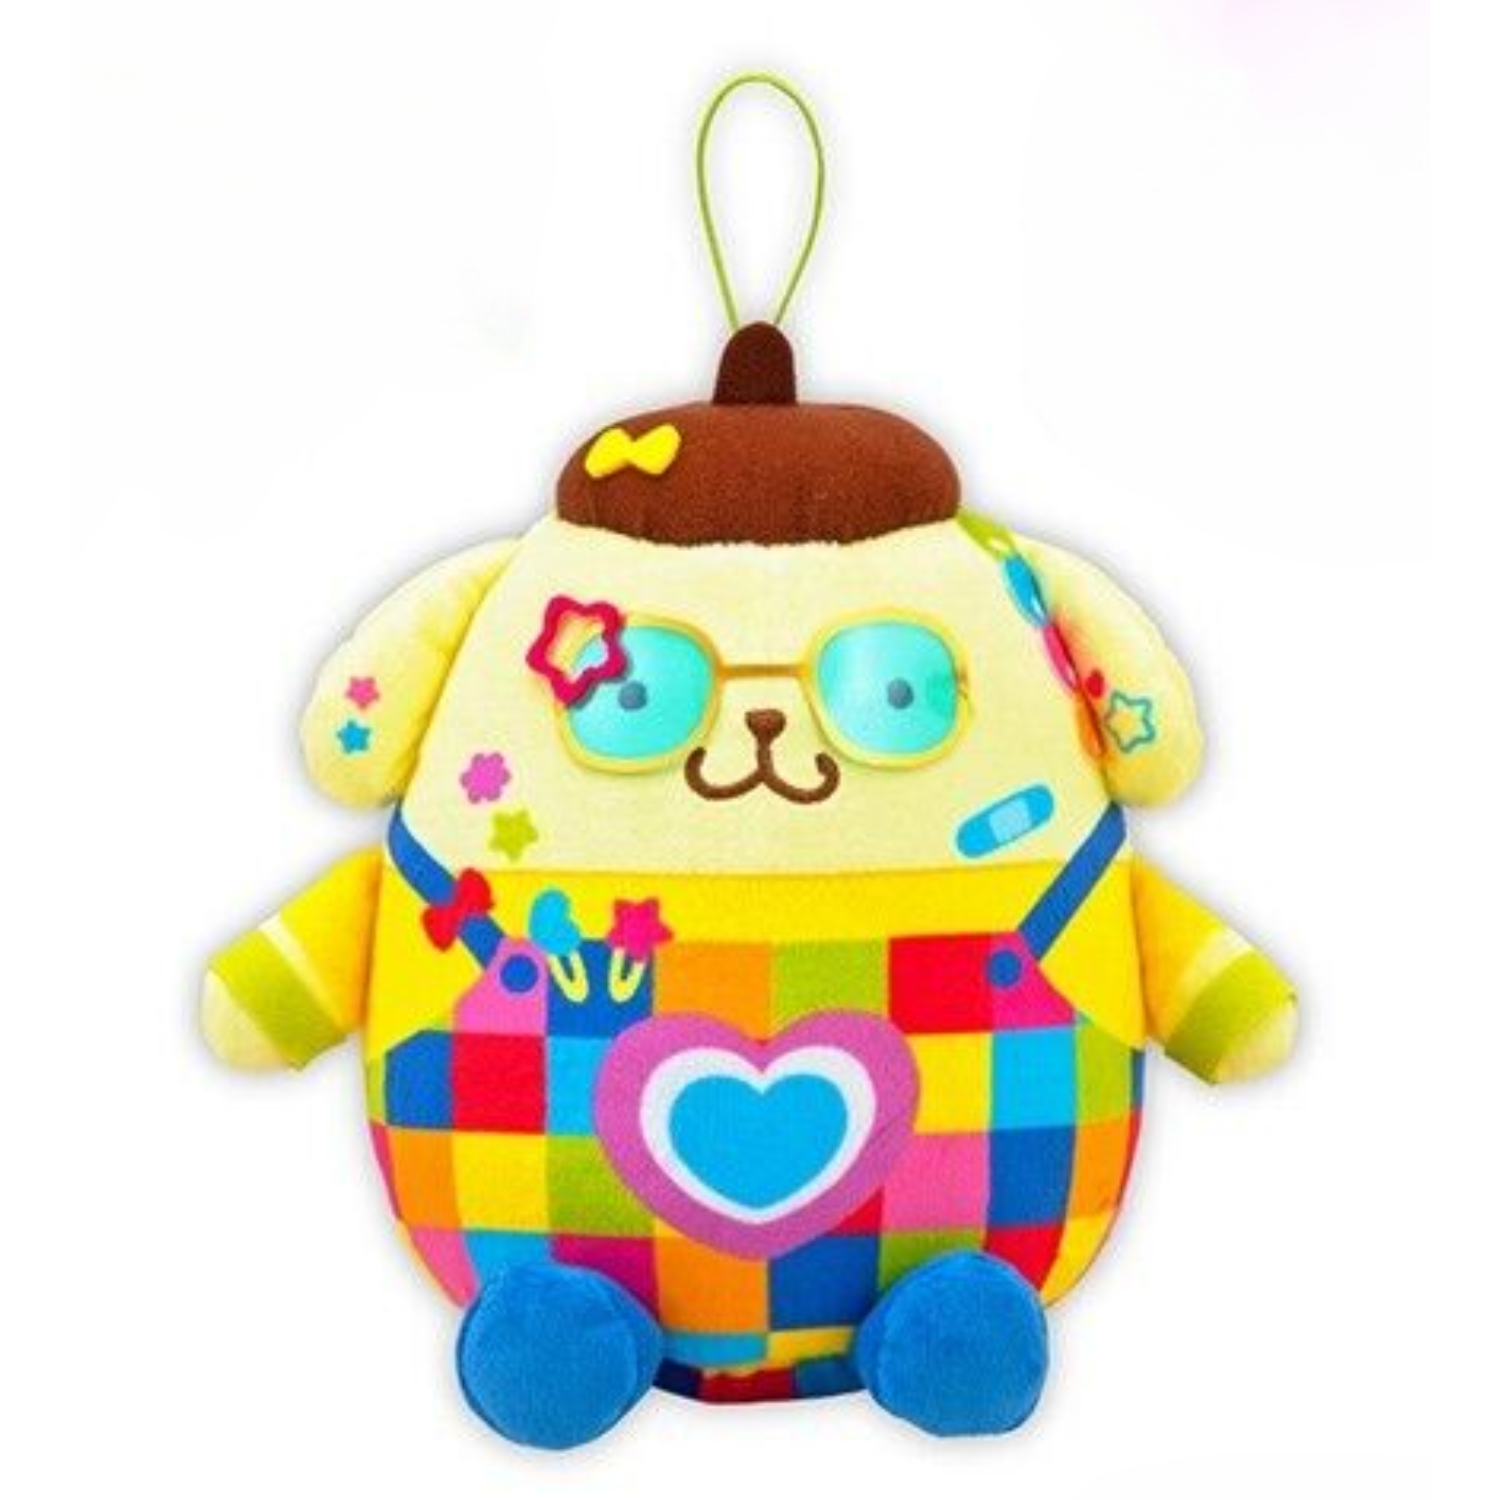 Pompompurin plush in colorful decora fashion. He's wearing rainbow block overalls with a heart in the middle. He has round yellow glasses with blue lenses, and lots of little rainbow stickers in star shapes all over his face.